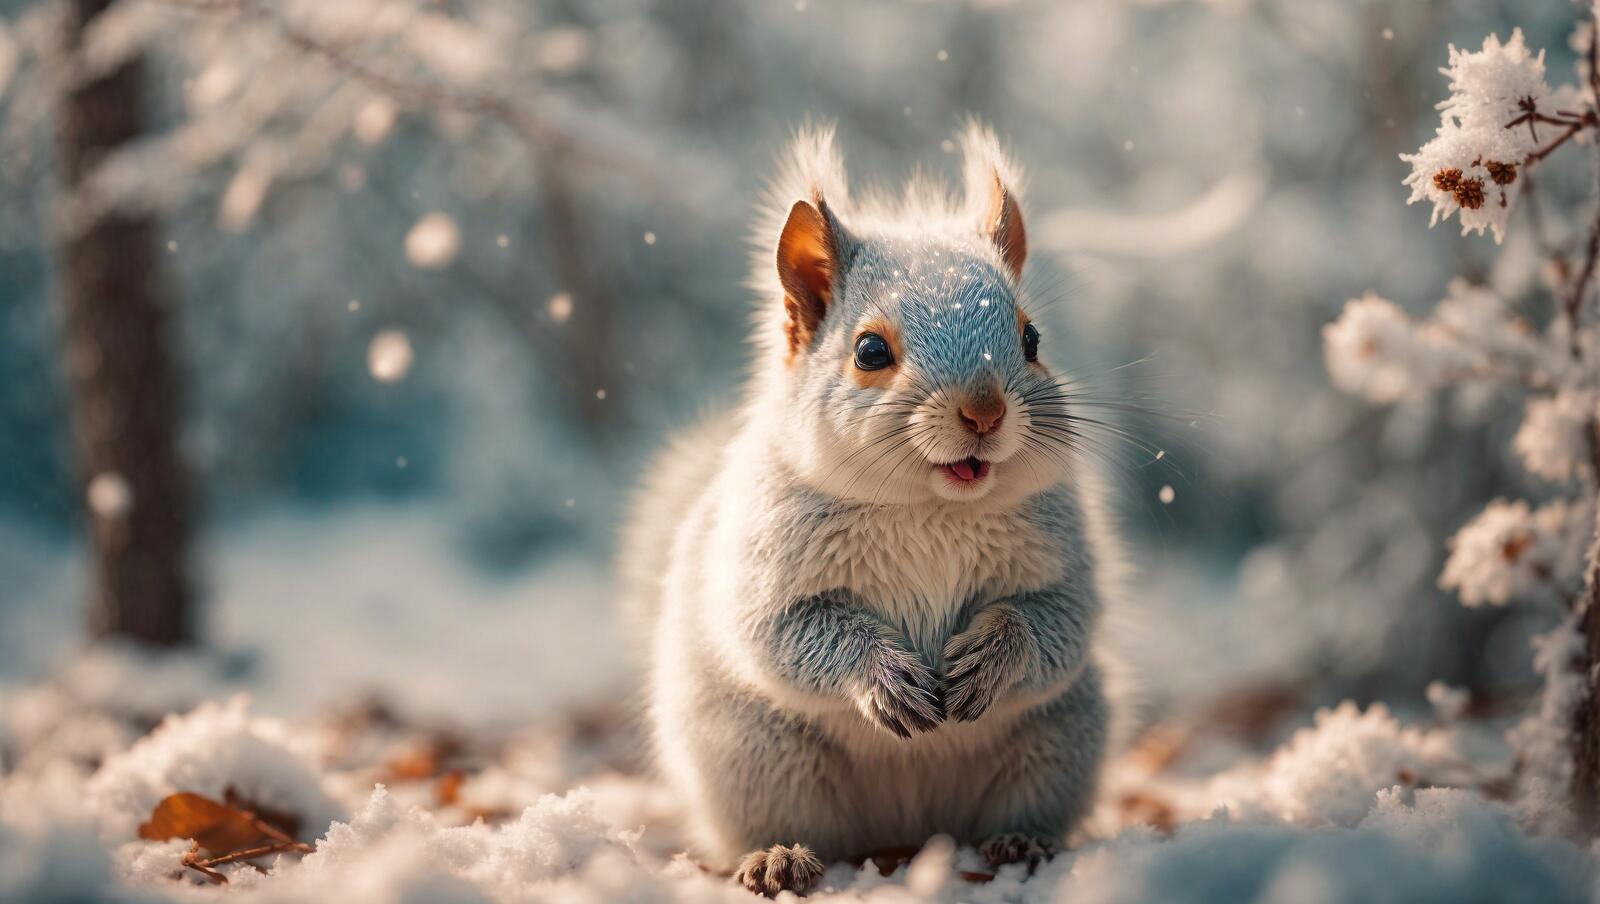 Free photo A squirrel with blue paint on its head sits in the snow